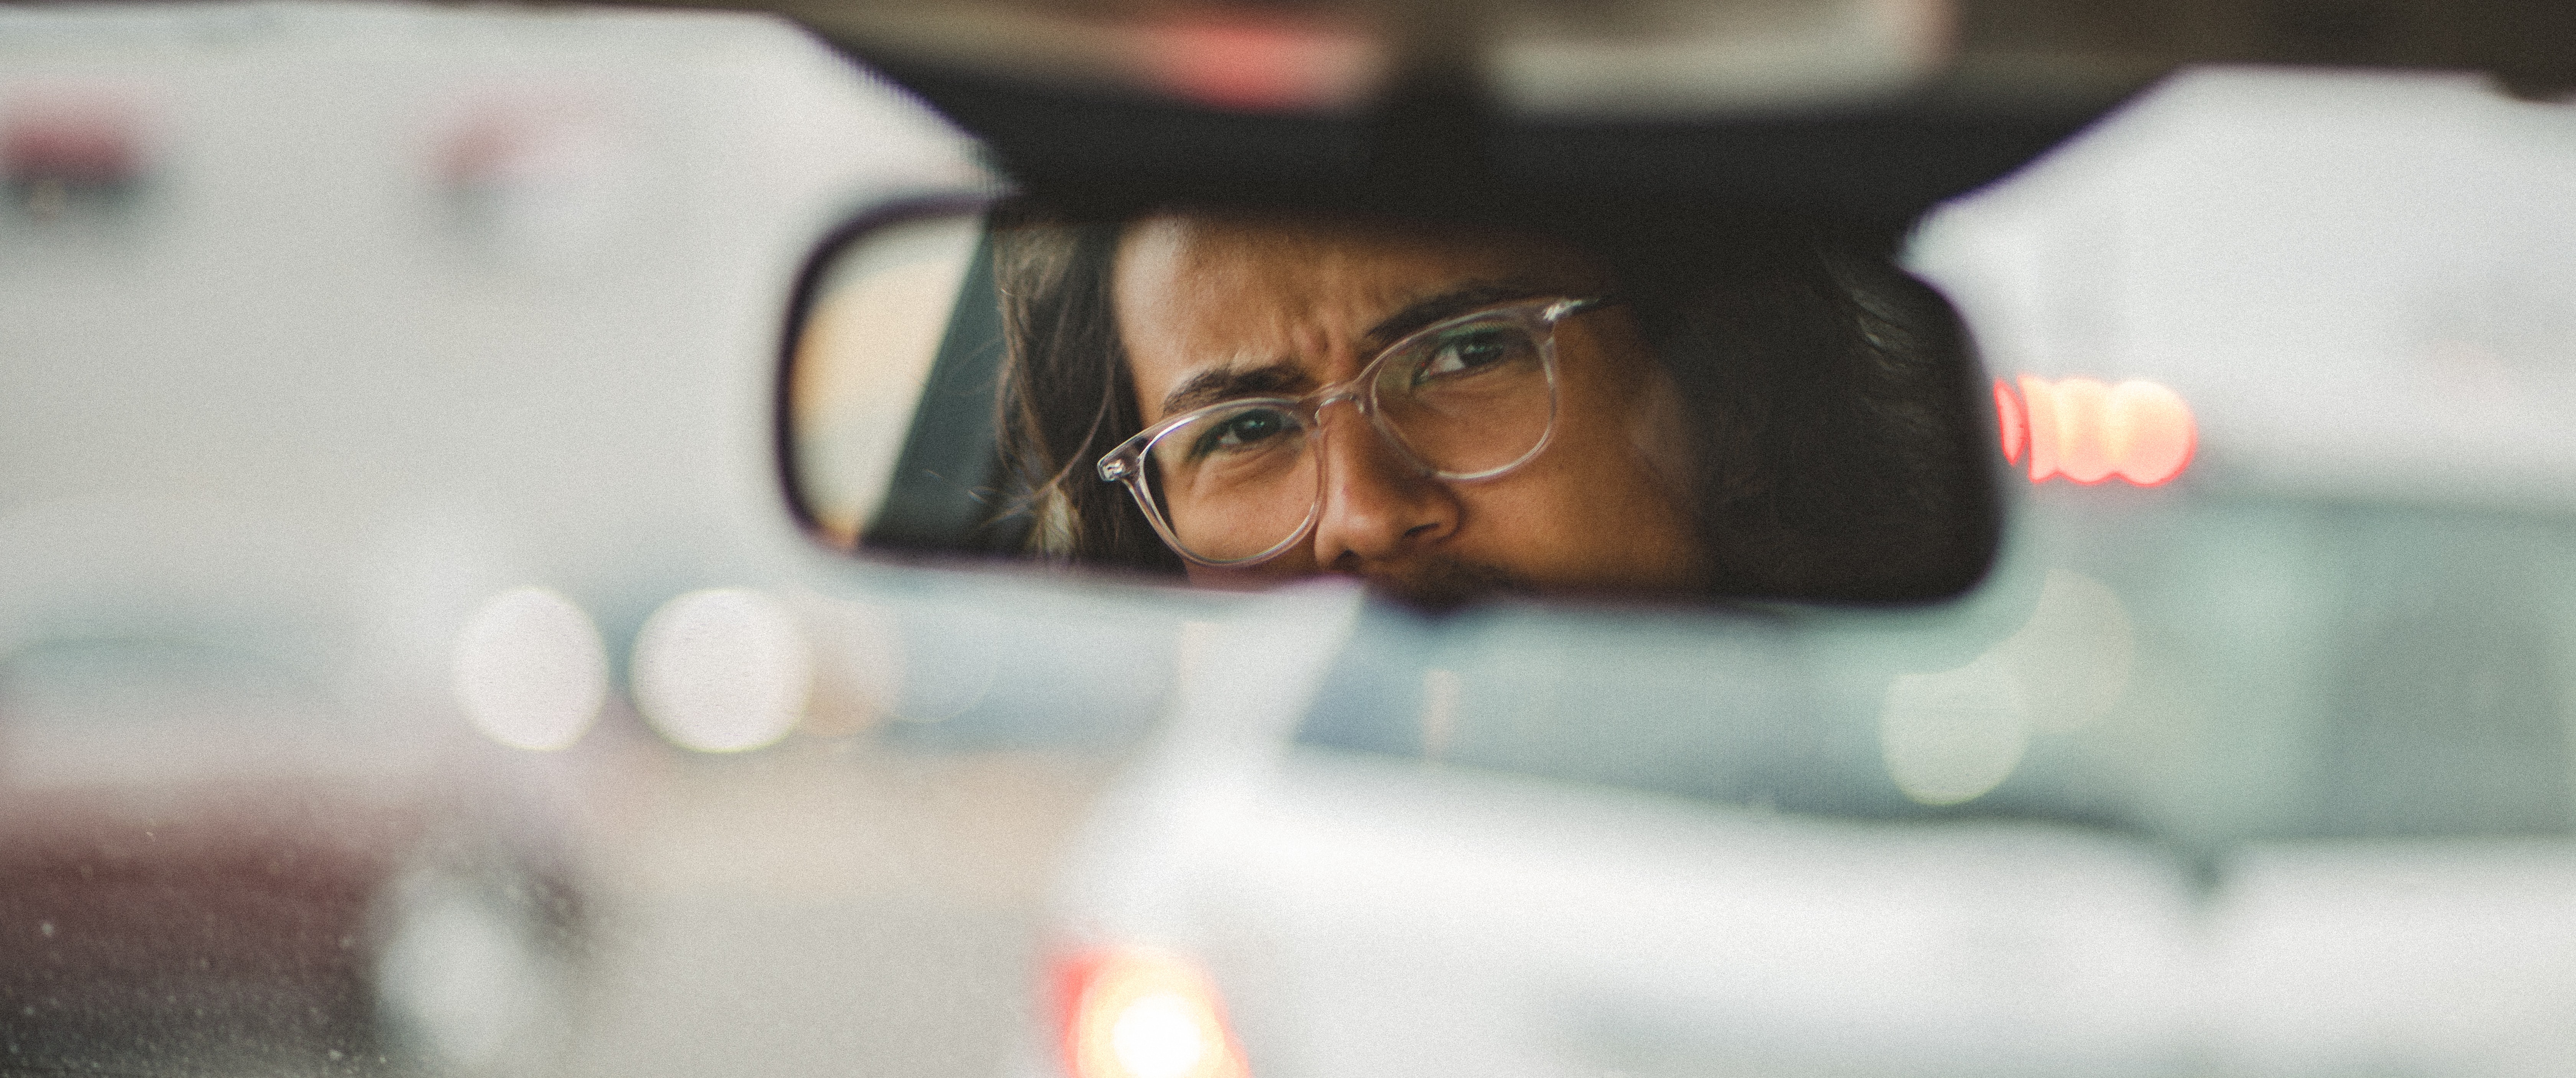 man squinting as he looks in a car's rearview mirror